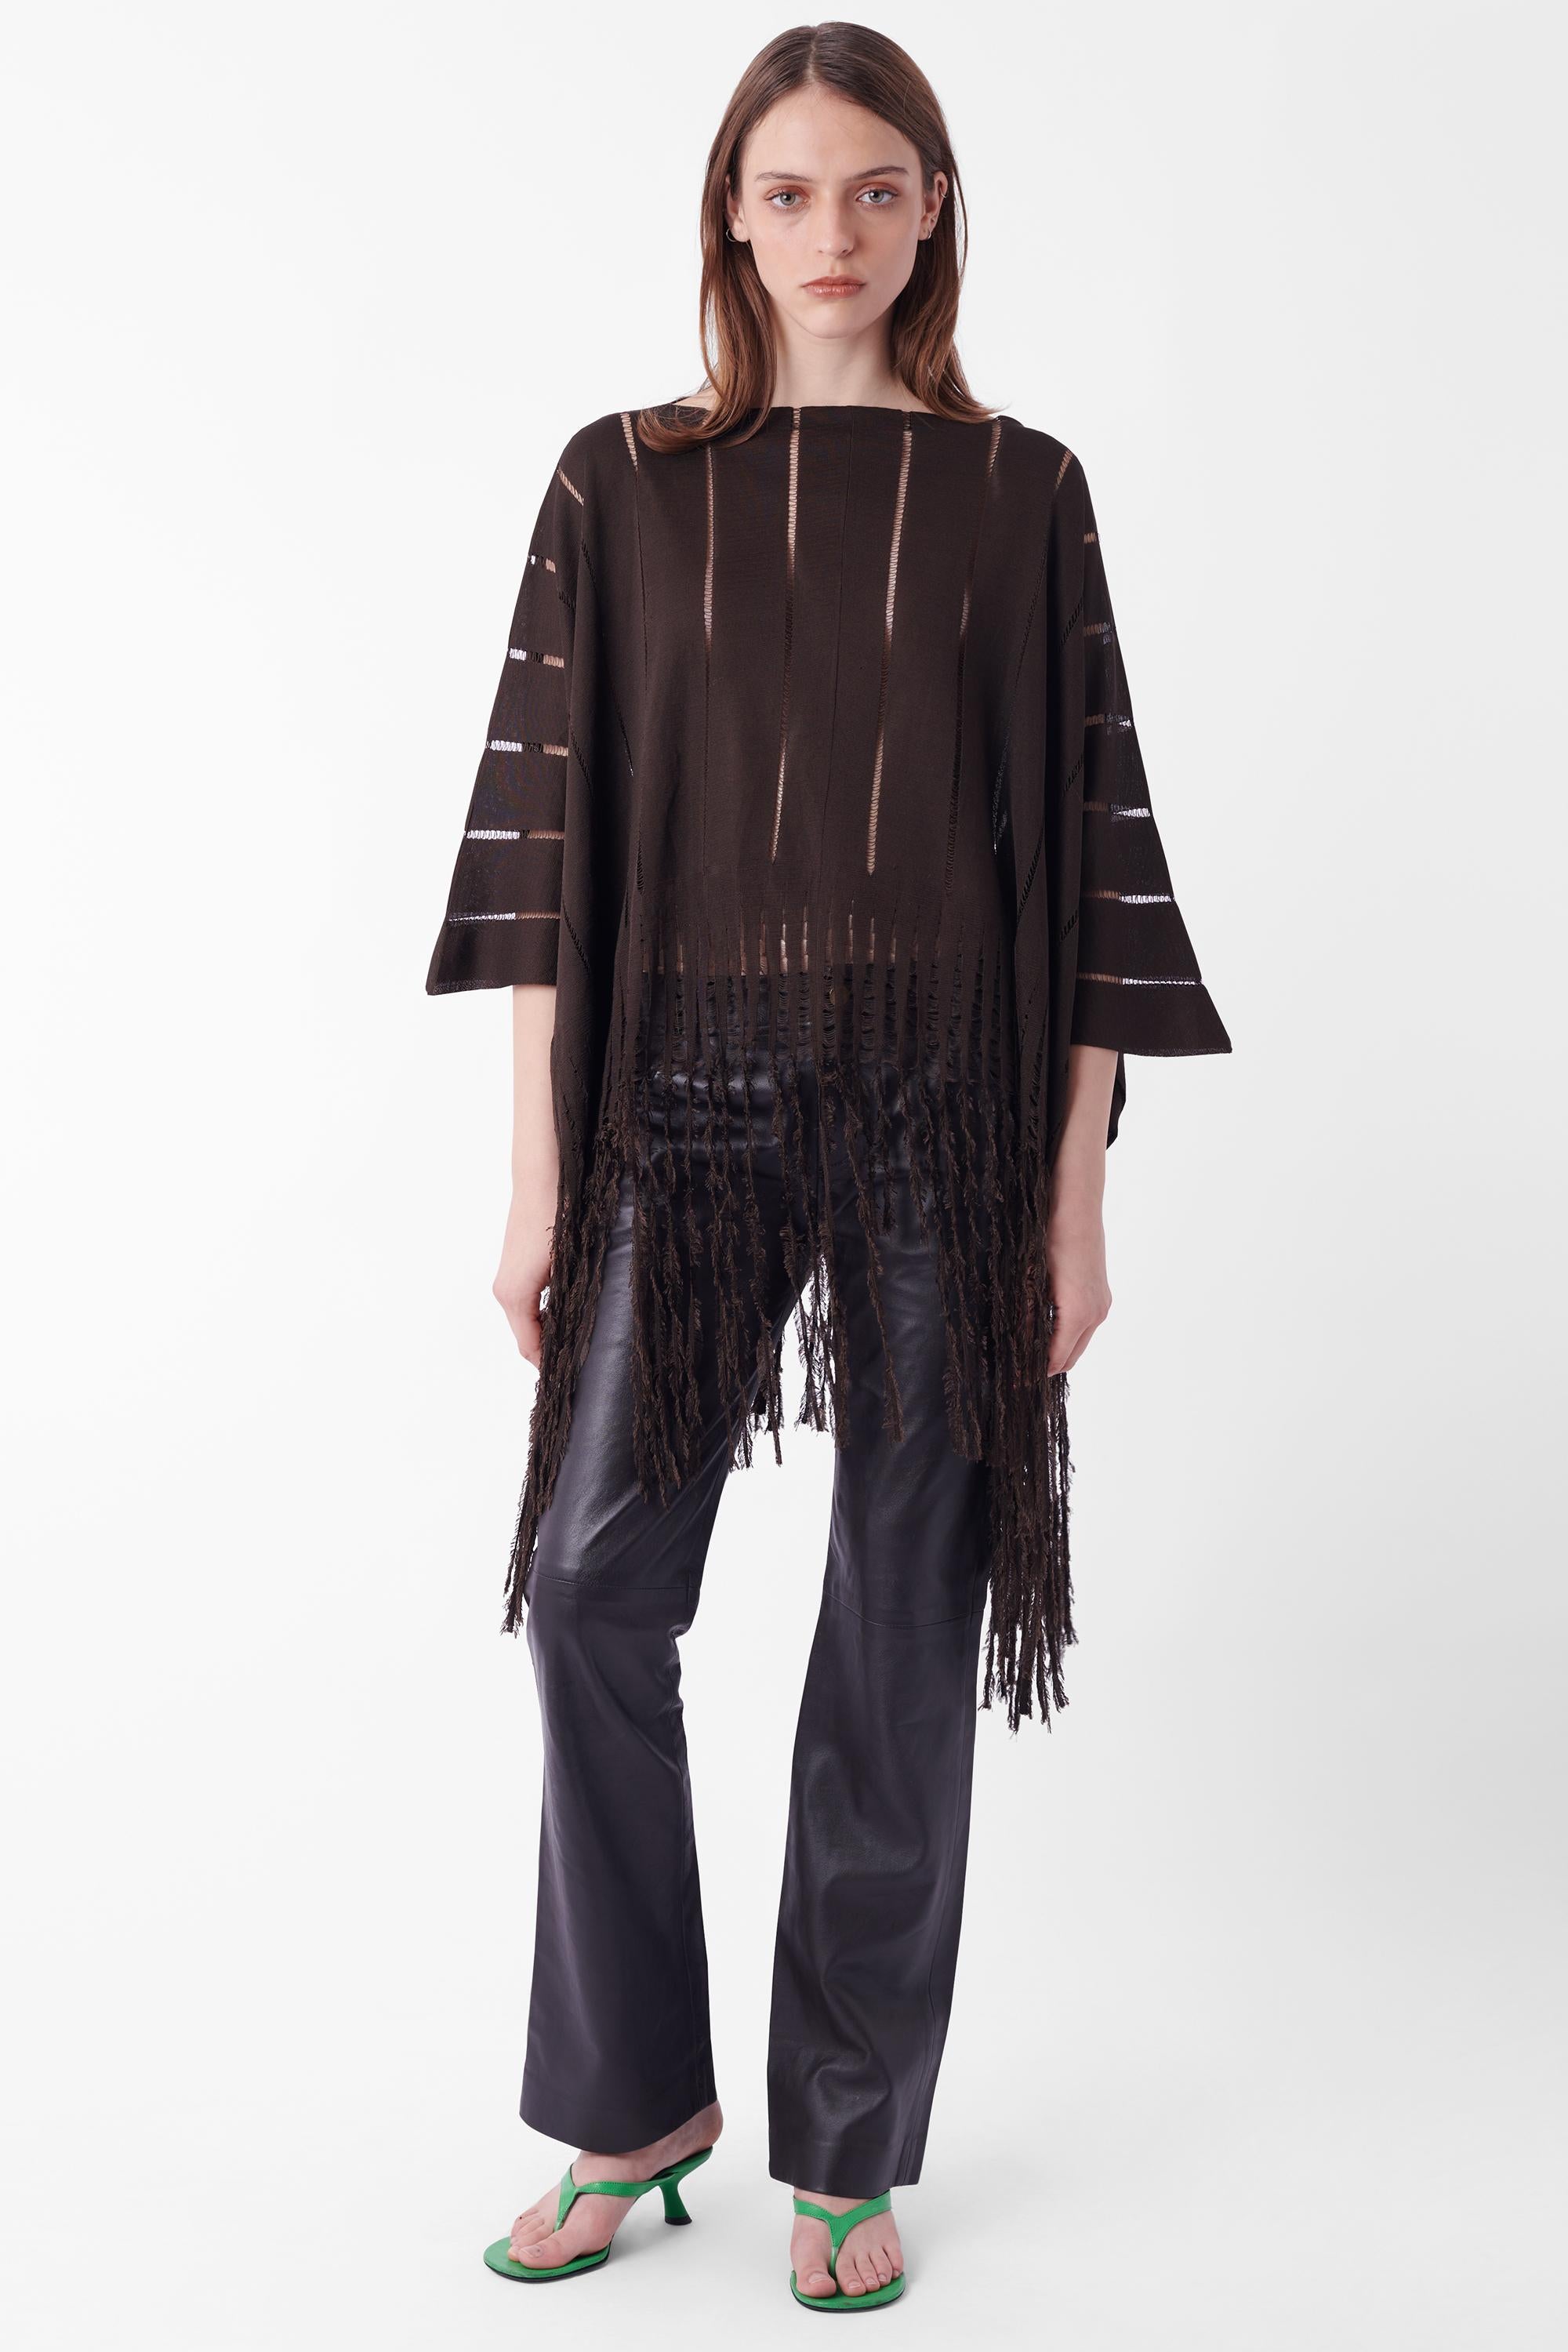 Yves Saint Laurent by Tom Ford Spring Summer 2002 poncho from the Safari collection. Features fringe running along the hem and sheer open stitch detailing running in a vertical format. Can be worn as a skirt. In great vintage condition, minimal